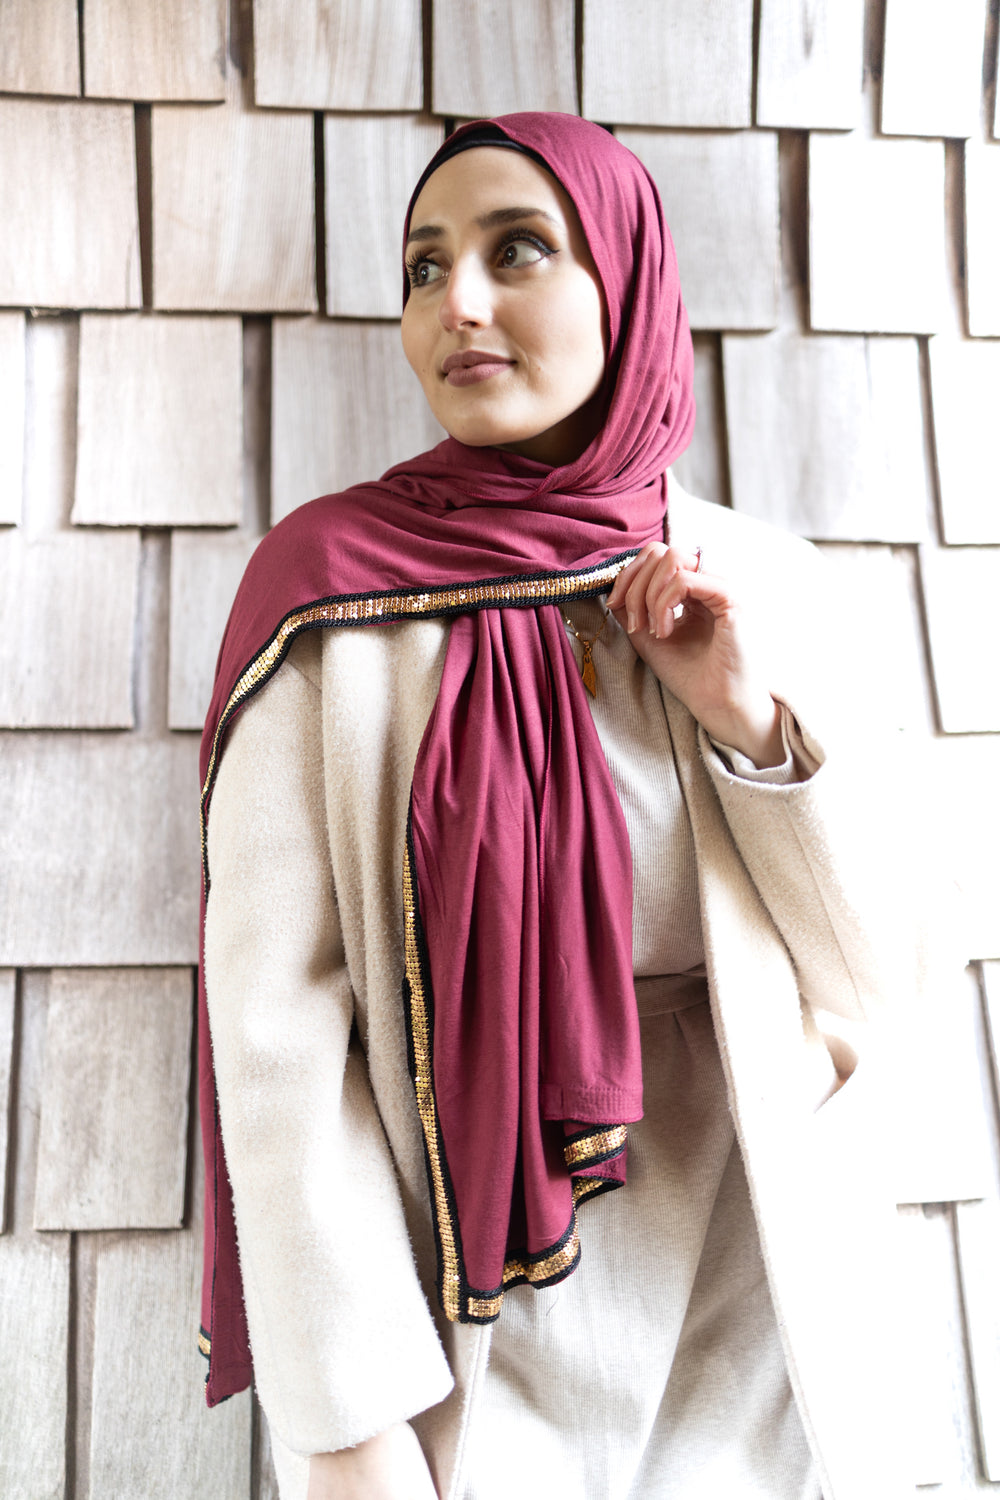 maroon jersey hijab embellished with a gold trim along the edges